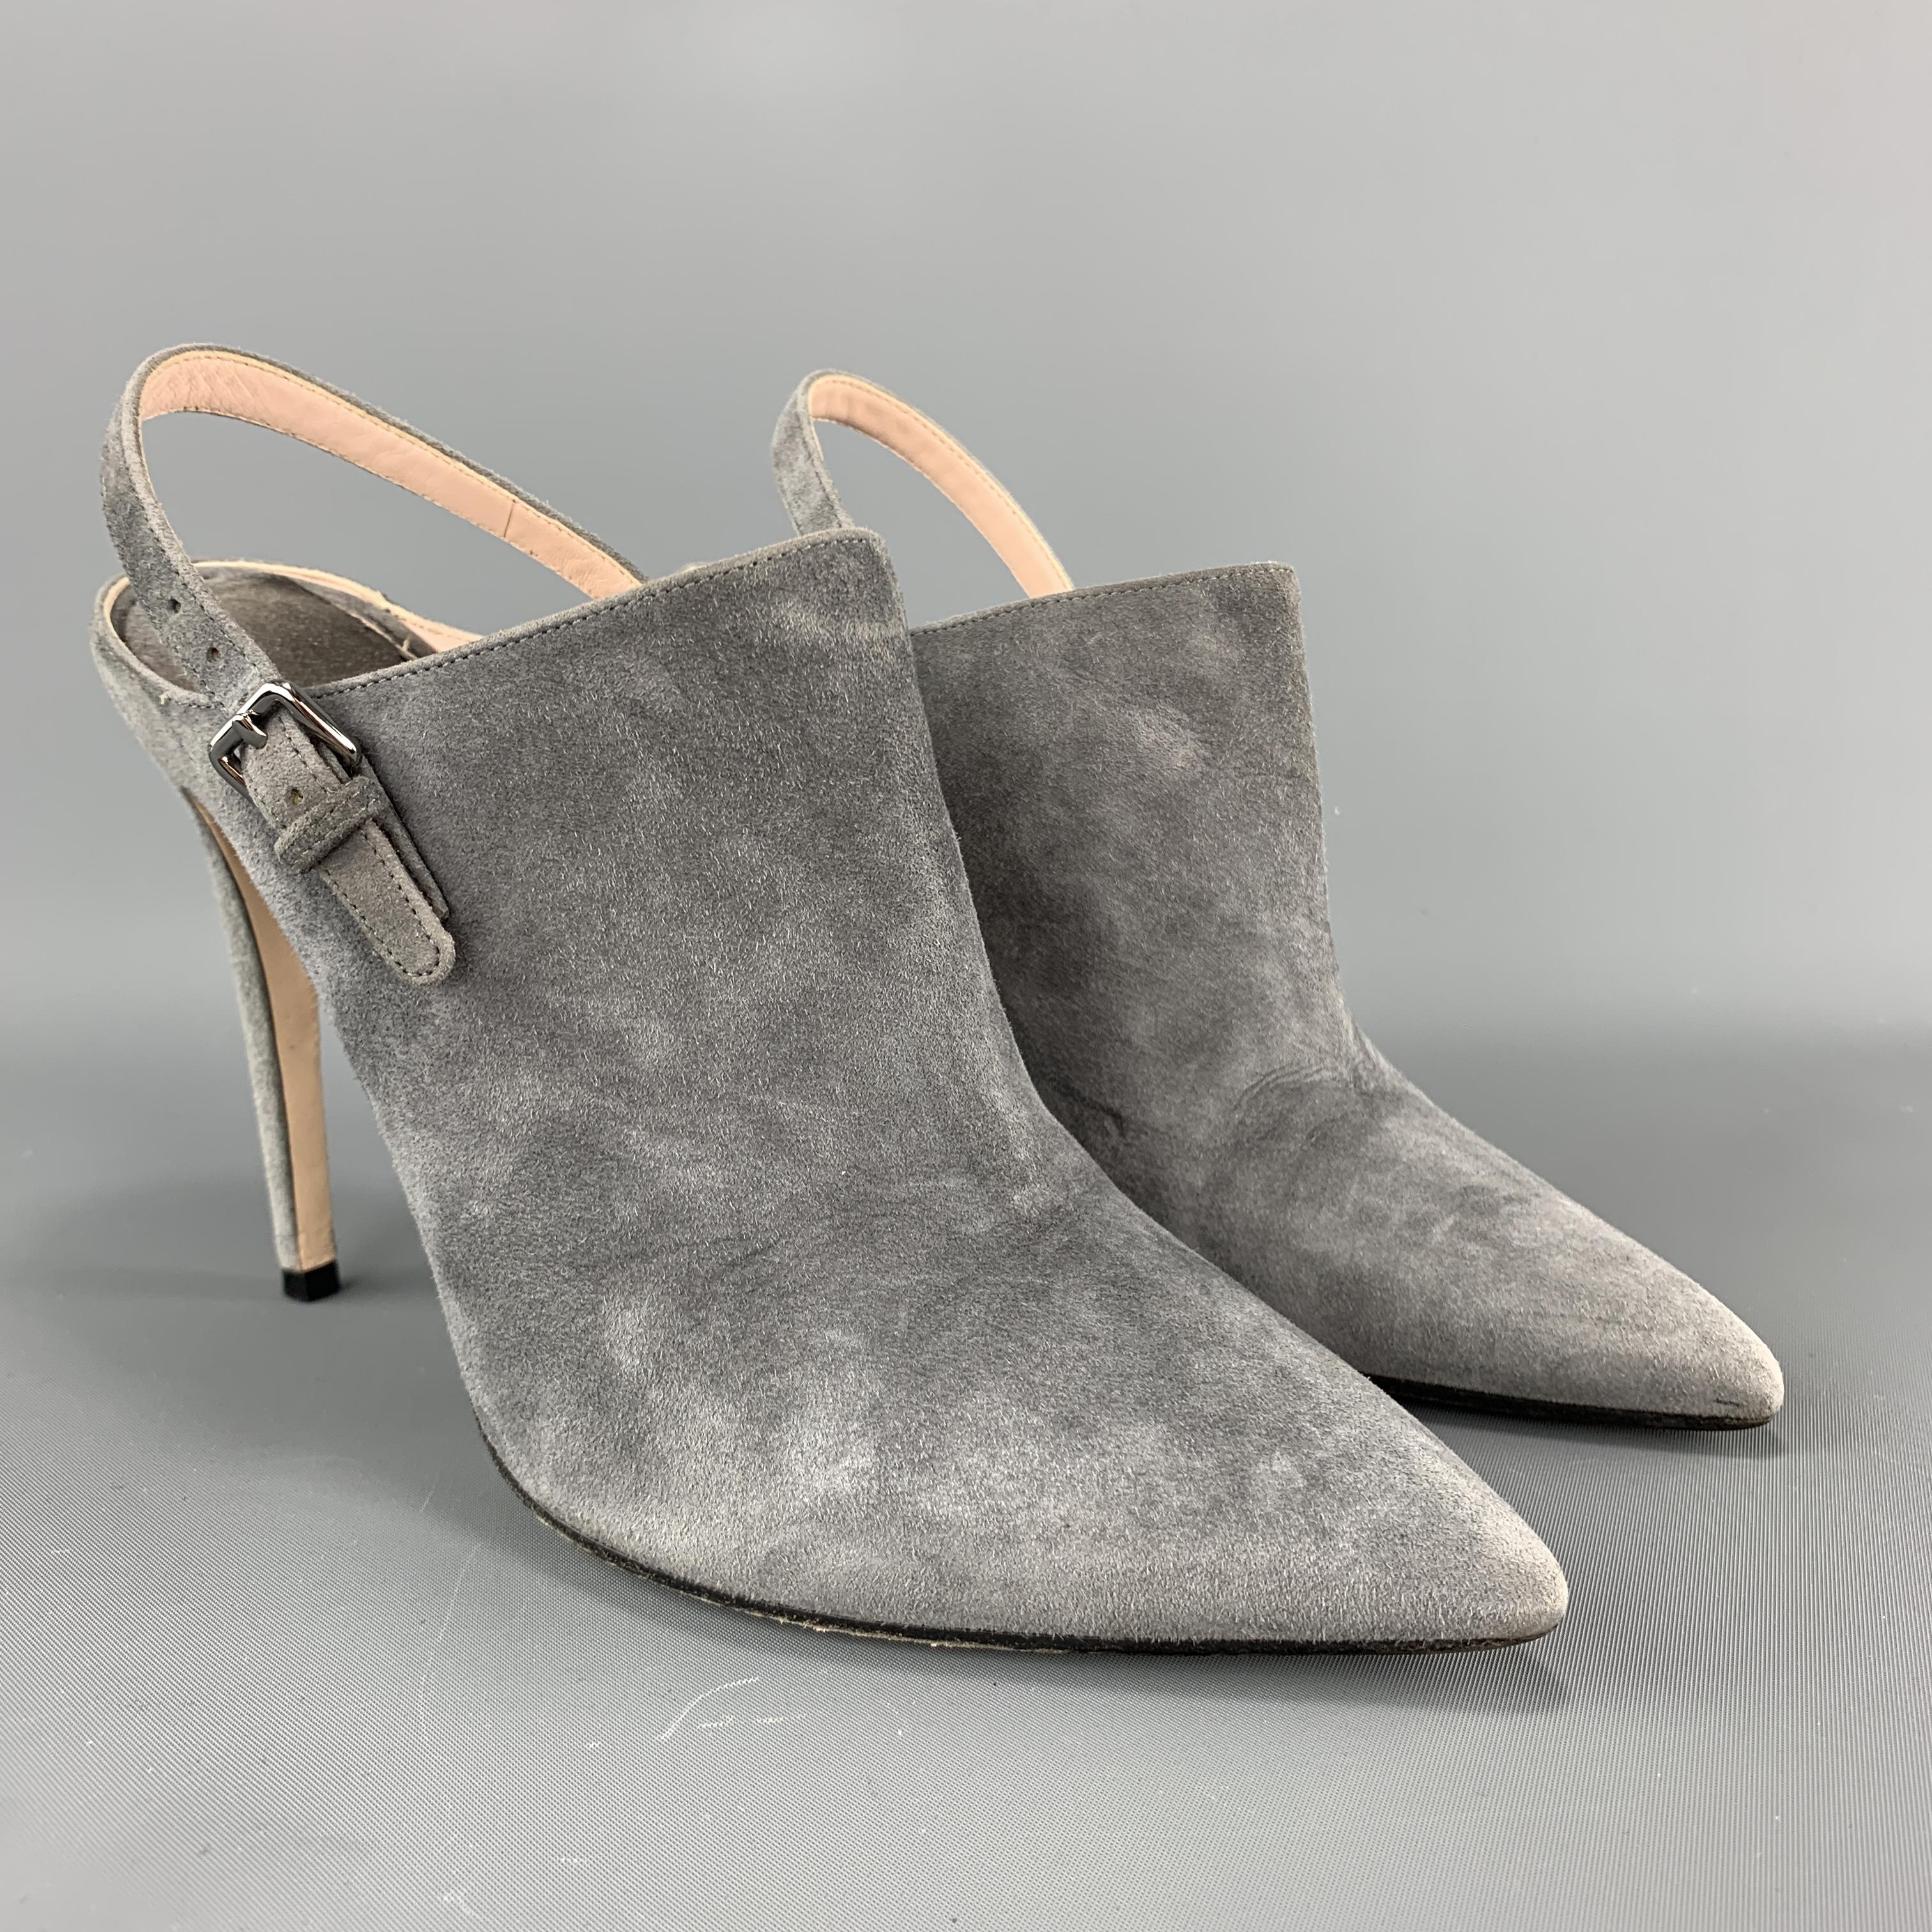 MIU MIU mule booties come in gray suede with a pointed toe, sling back strap, and covered stiletto heel. Made in Italy.

Very Good Pre-Owned Condition.
Marked: IT 37.5

Heel: 4.75 in.